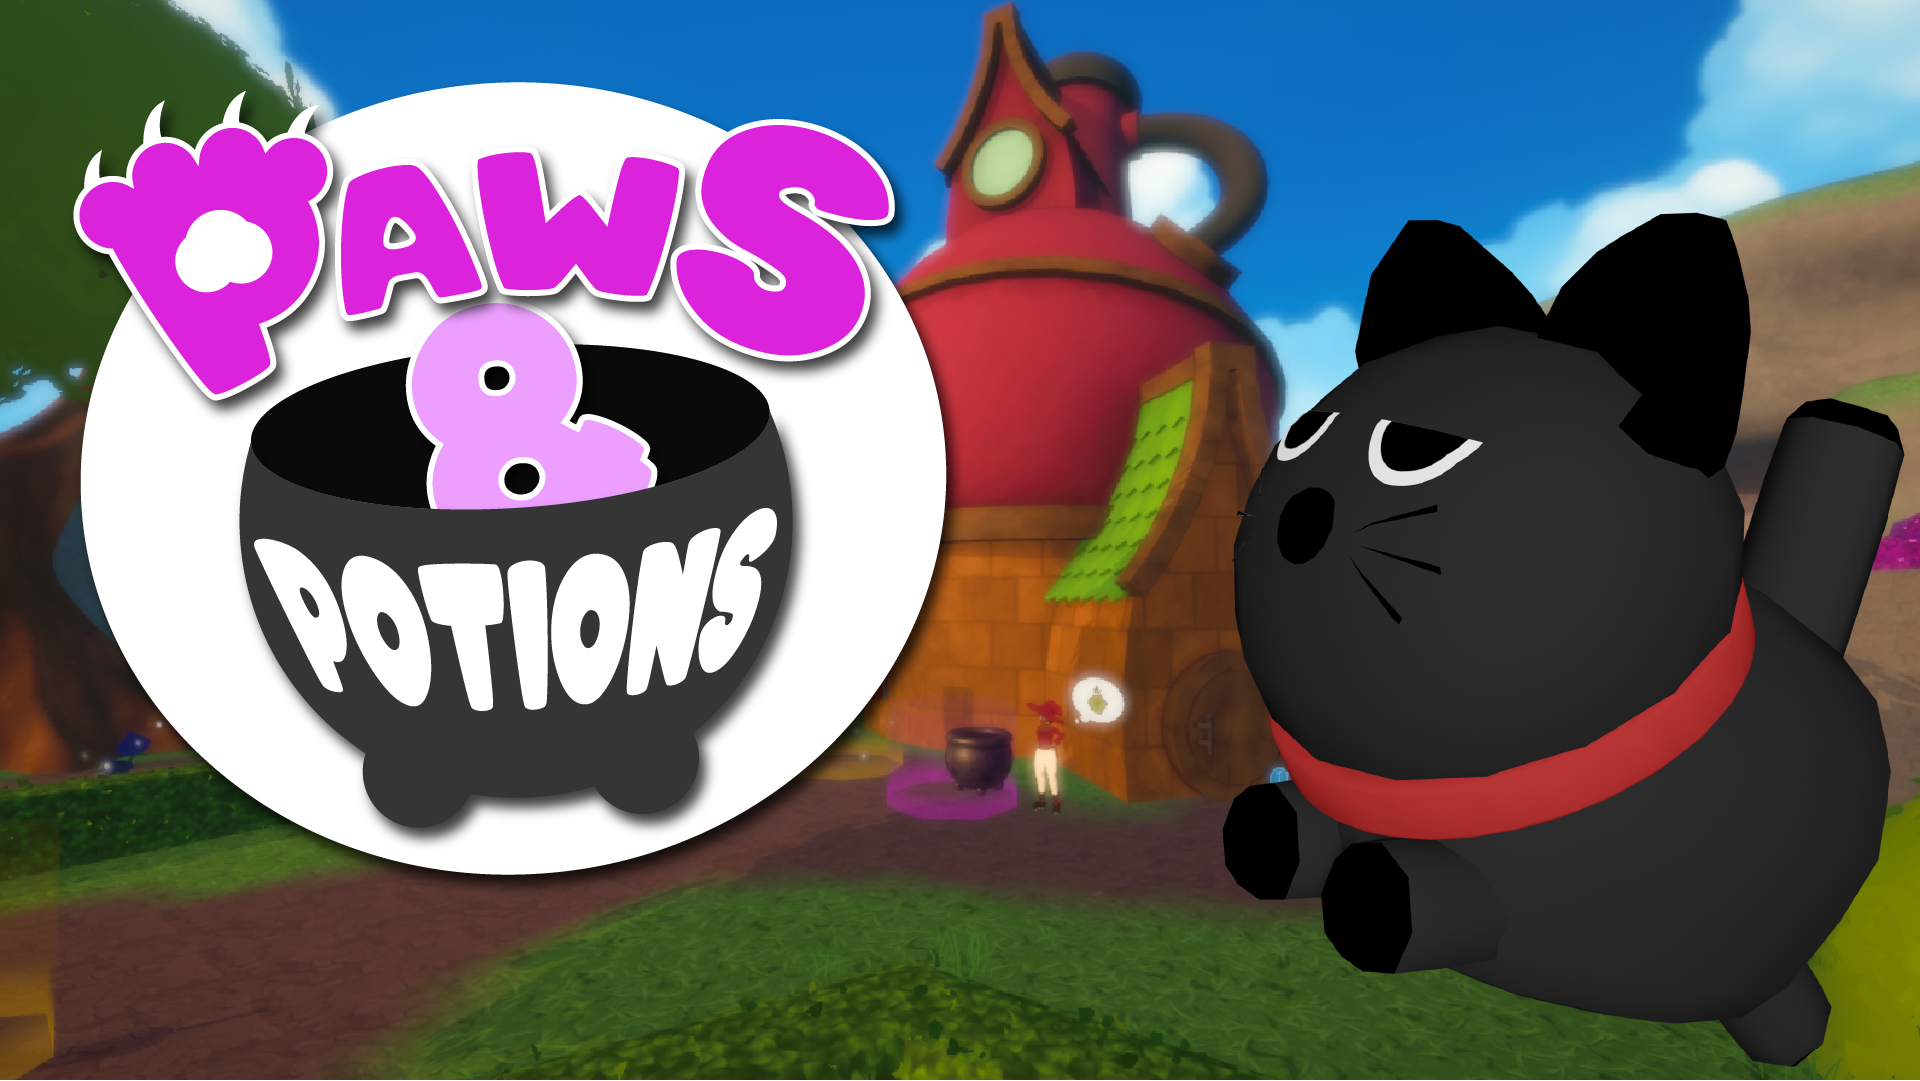 Paws & Potions